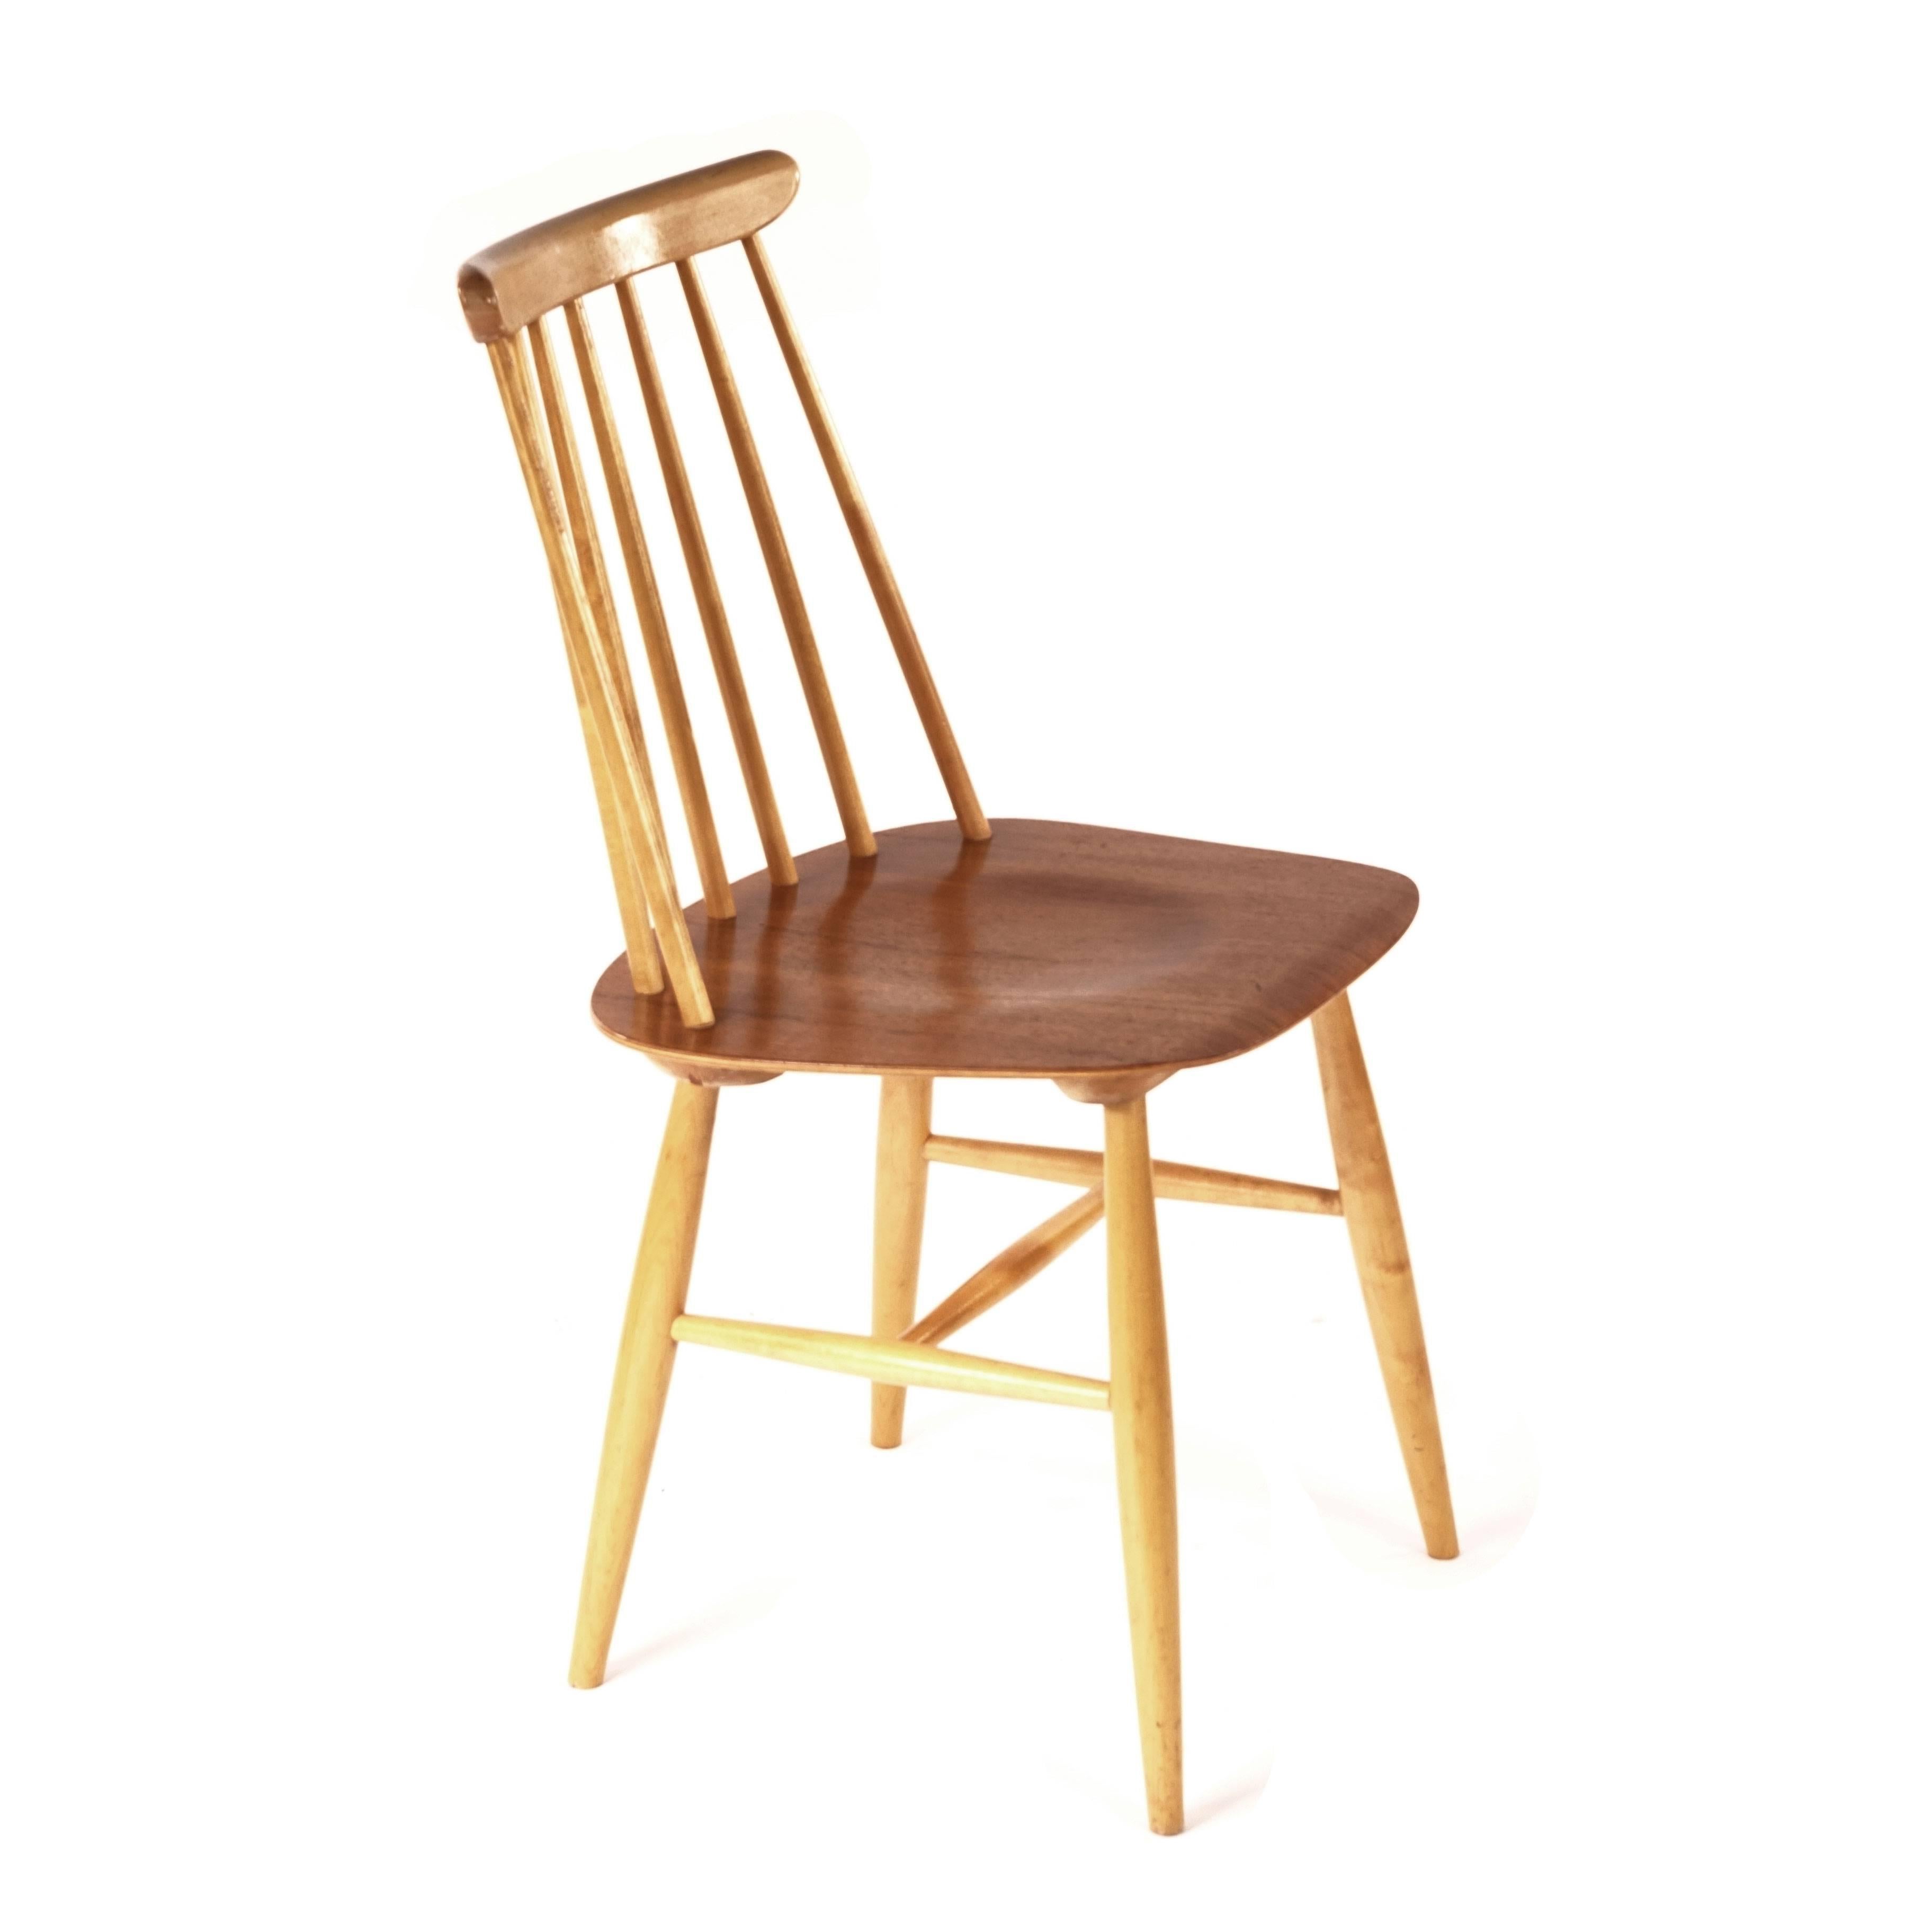 The lovely Tapiovaara Fanett vintage dining chair. T 65. We have four in stock. 

Designed by Ilmari Tapiovaara in 1949. Teak seat and the rest in birchwood. Marked: Manufactured by Edsby Verken, Made in Sweden, Fanett Tapiovaara design. 

. 